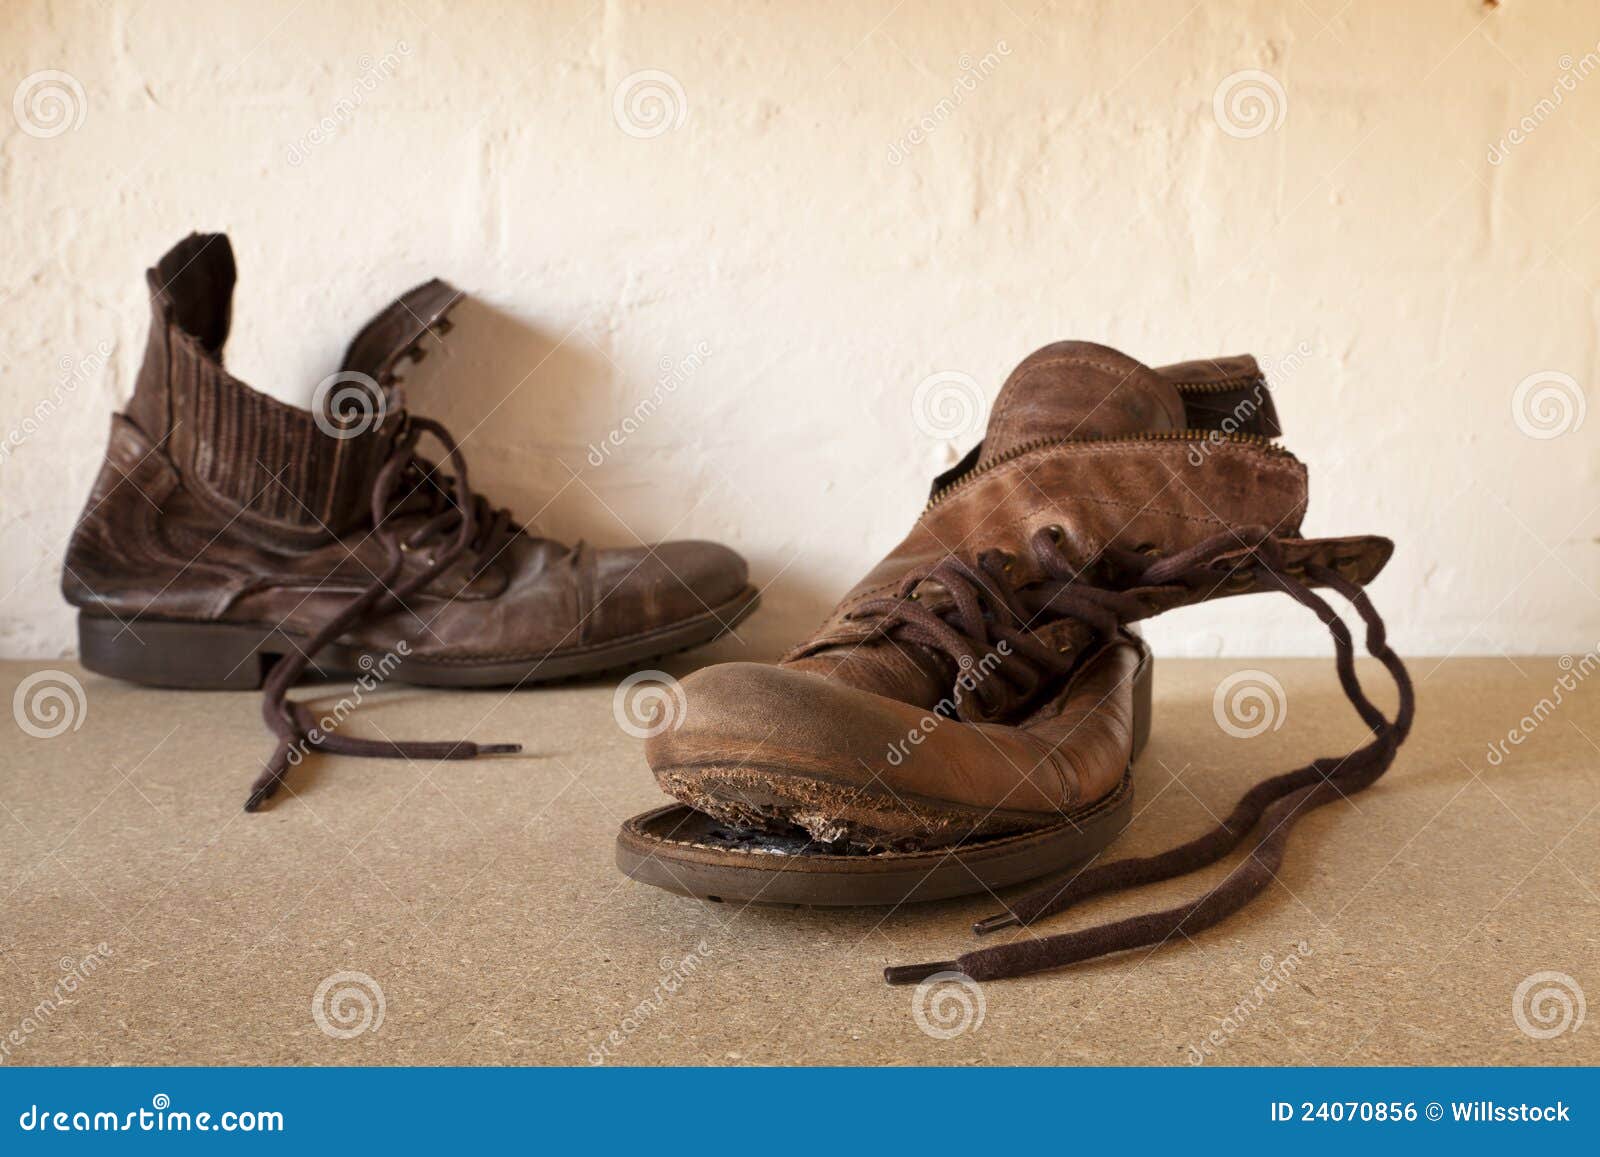 Old Boots stock photo. Image of ripped, dumped, brown - 24070856